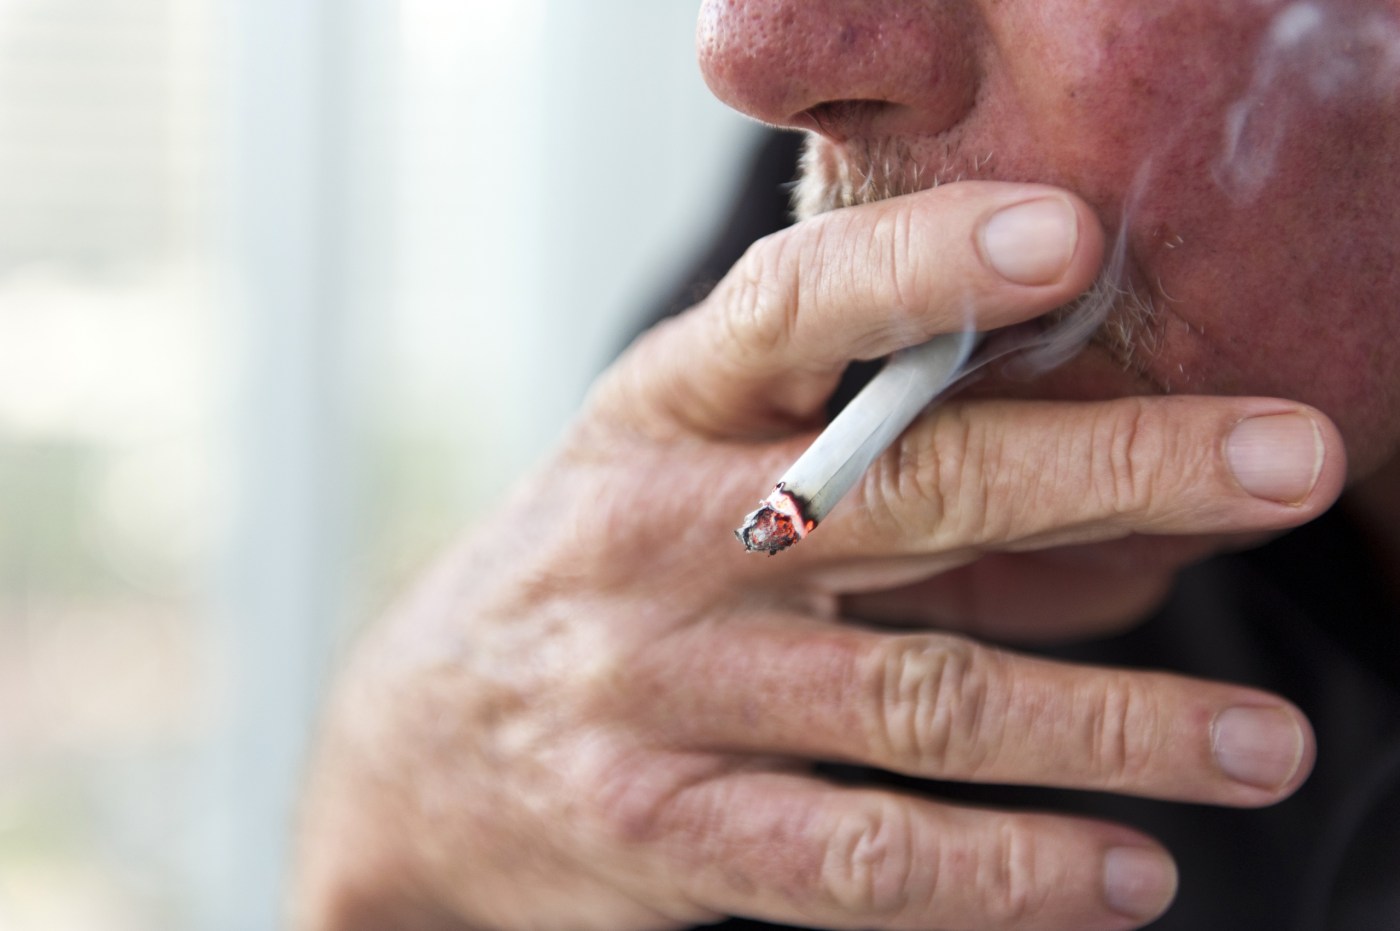 A VA study examining COVID-19 and tobacco use found older male Veterans, plus those with immunodeficiency, or endocrine or lung diseases, to be at higher risk of death. Smoking predicted mortality above and beyond those factors.